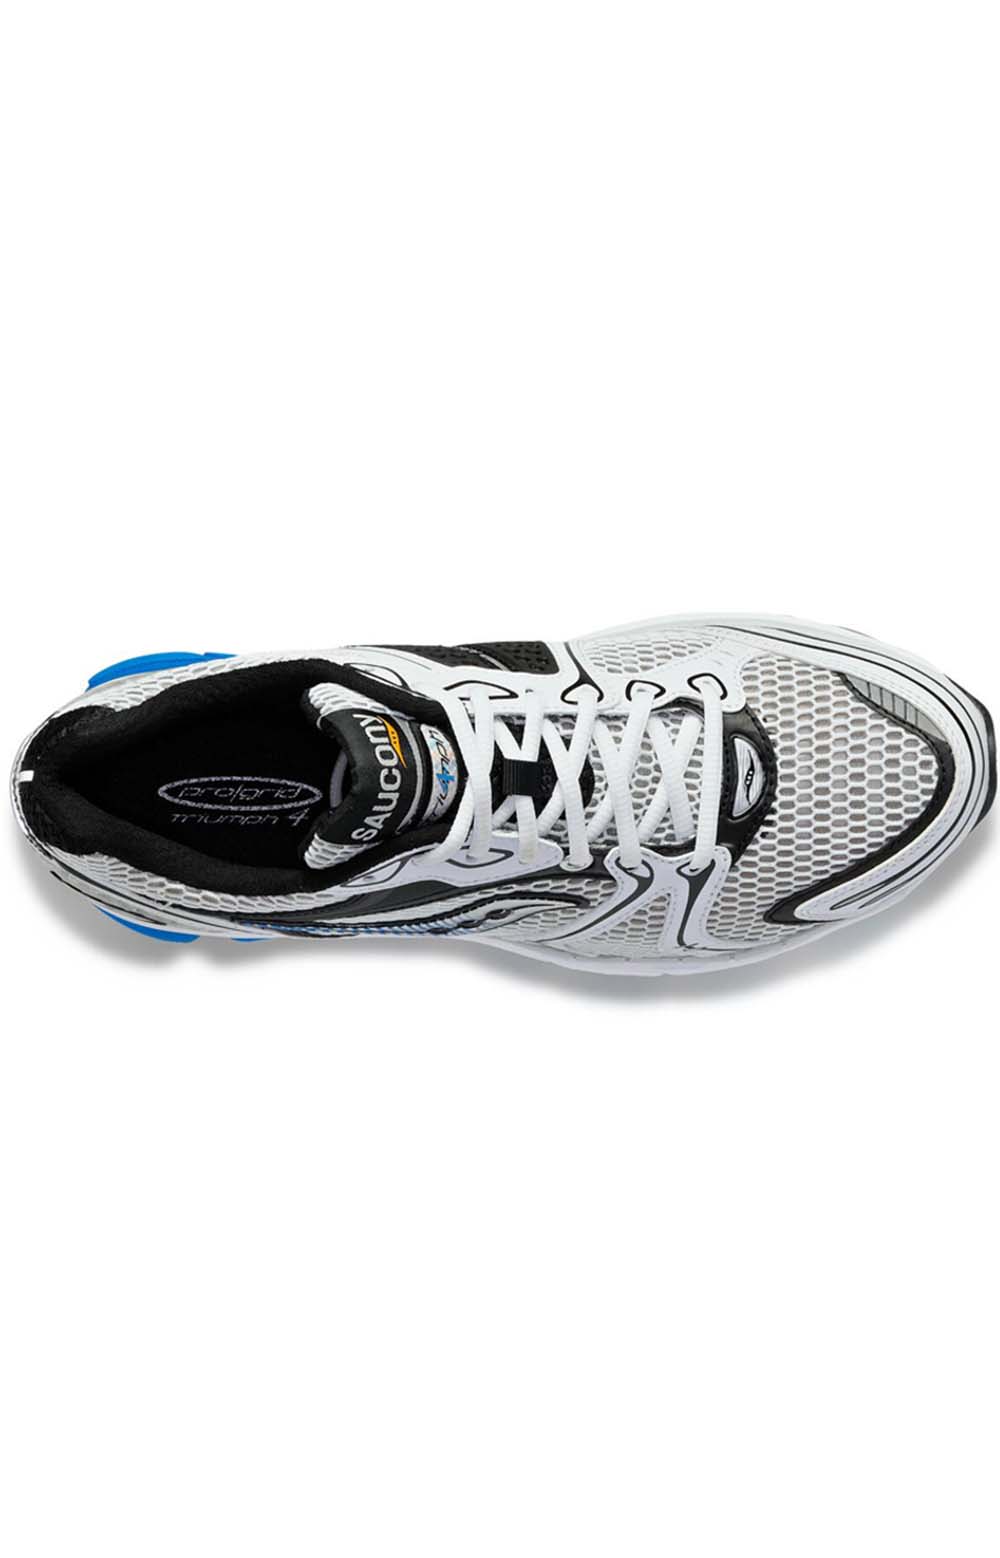 (s70704-3) Progrid Triumph 4 Shoes White And Silver